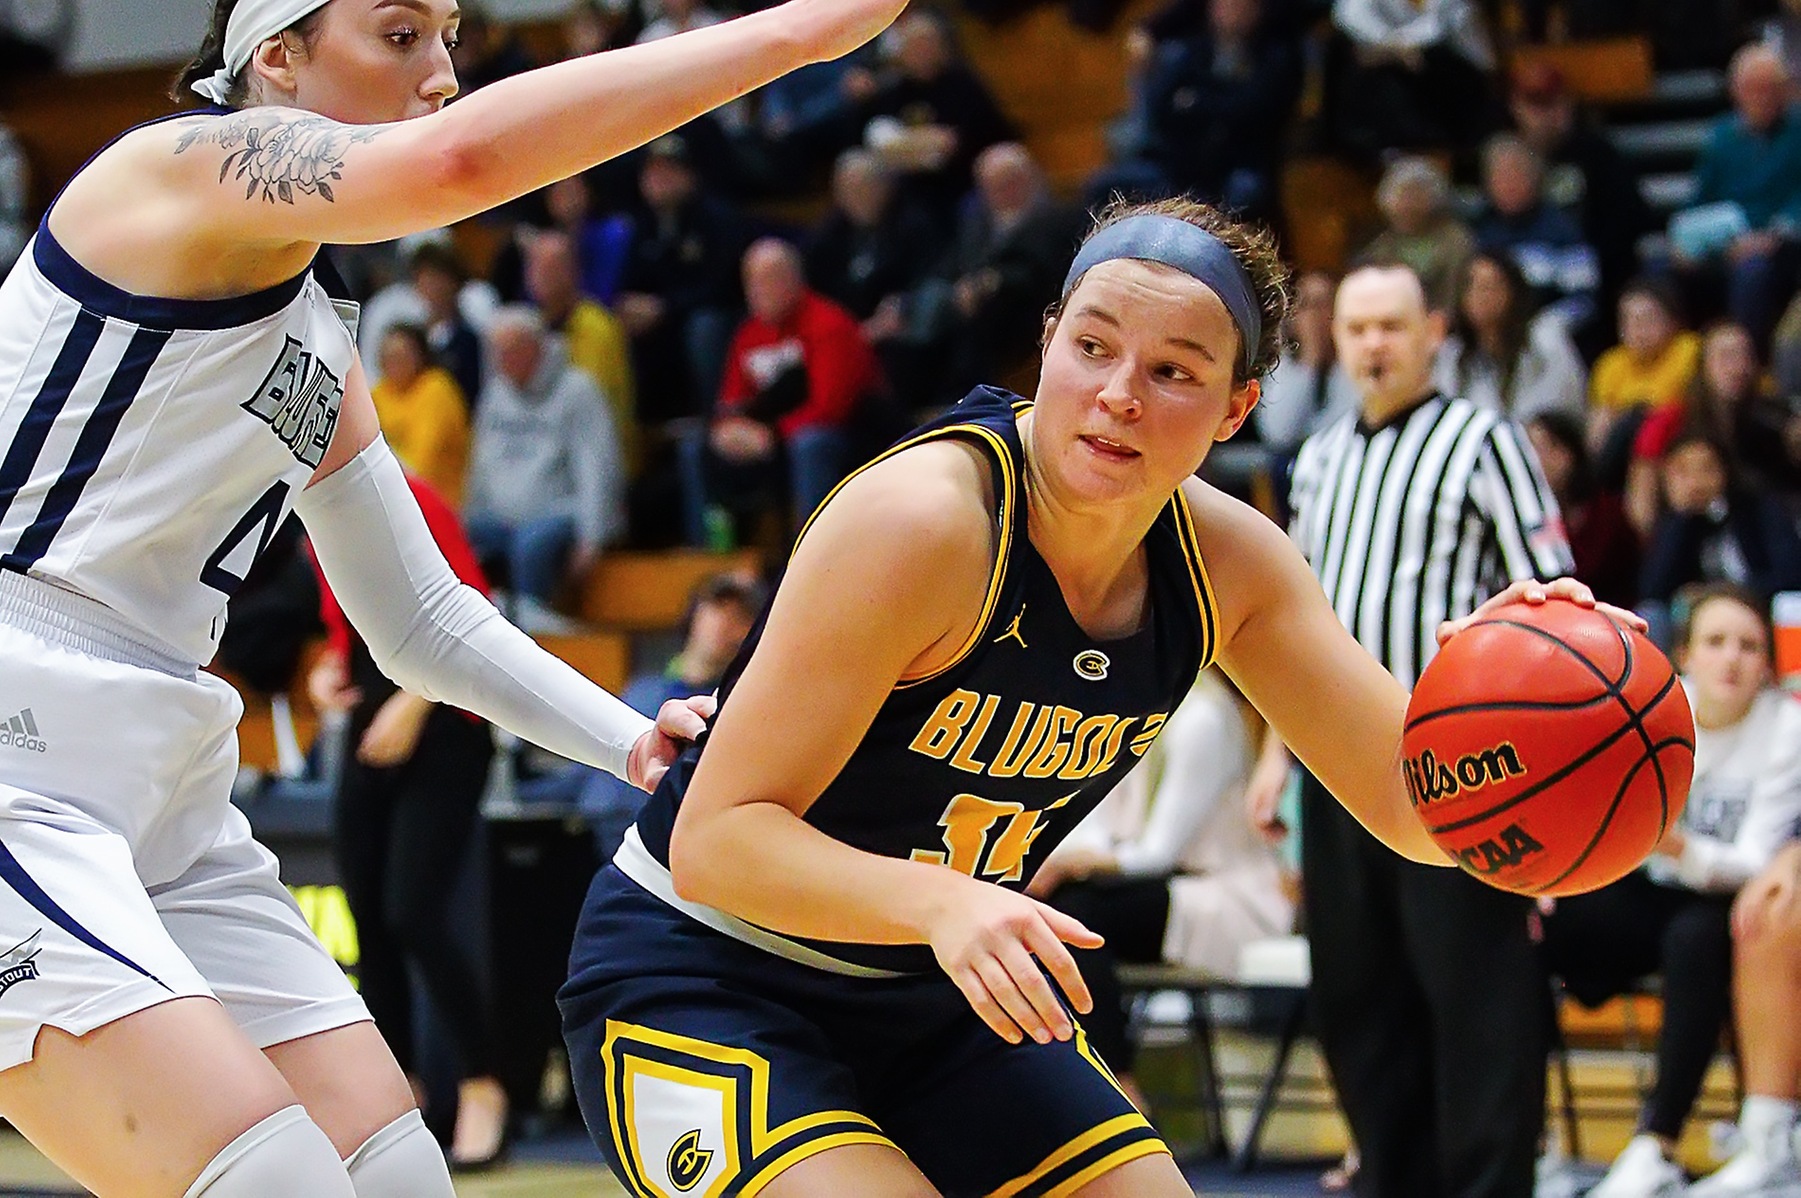 Blugolds down Blue Devils in double overtime